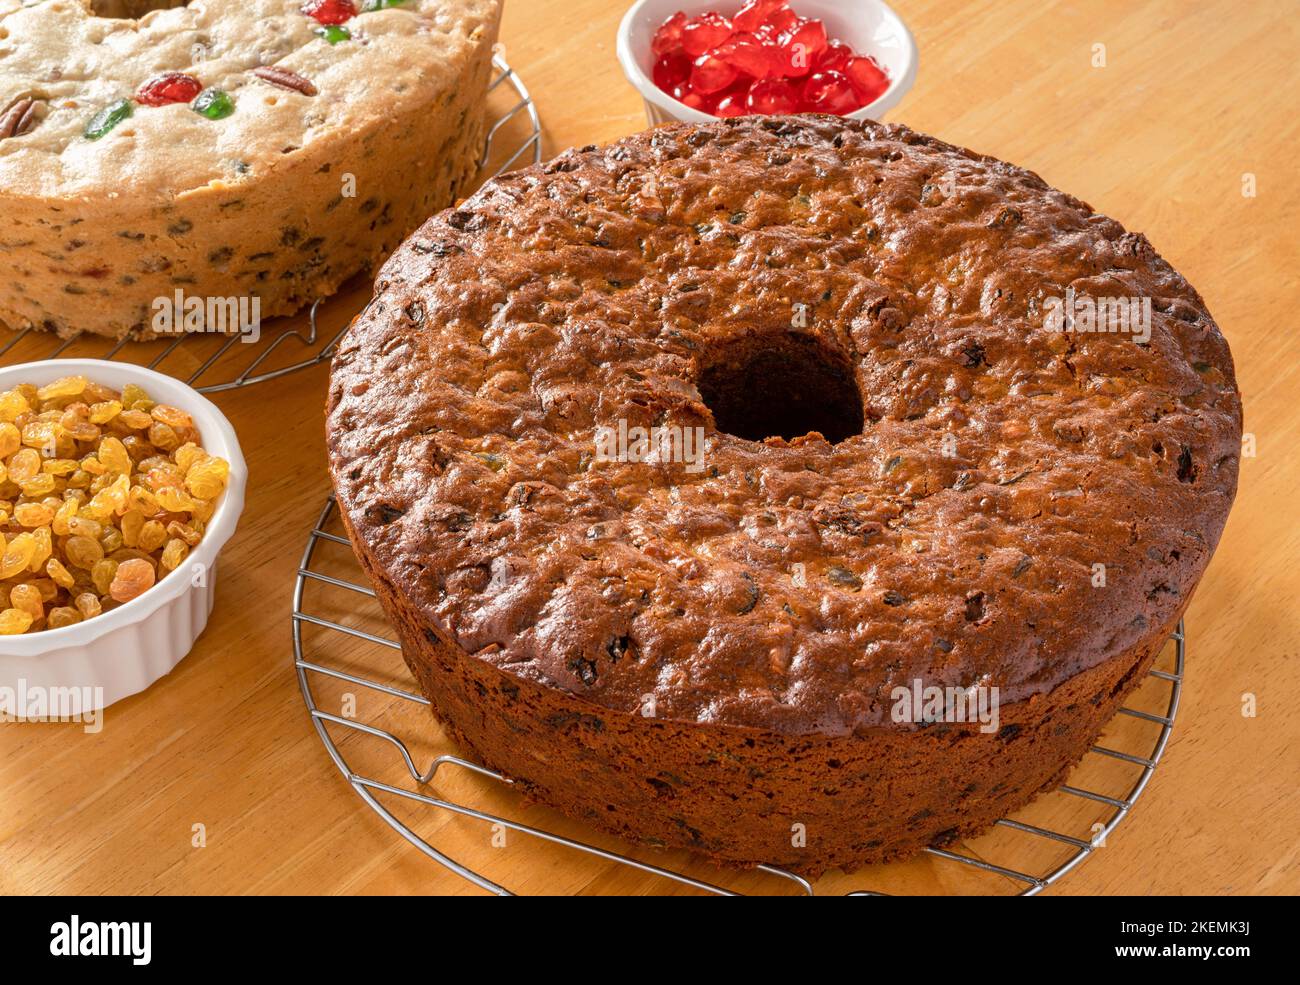 Homemade dark and light fruitcakes fresh out of the oven and cooling on baking racks. Stock Photo